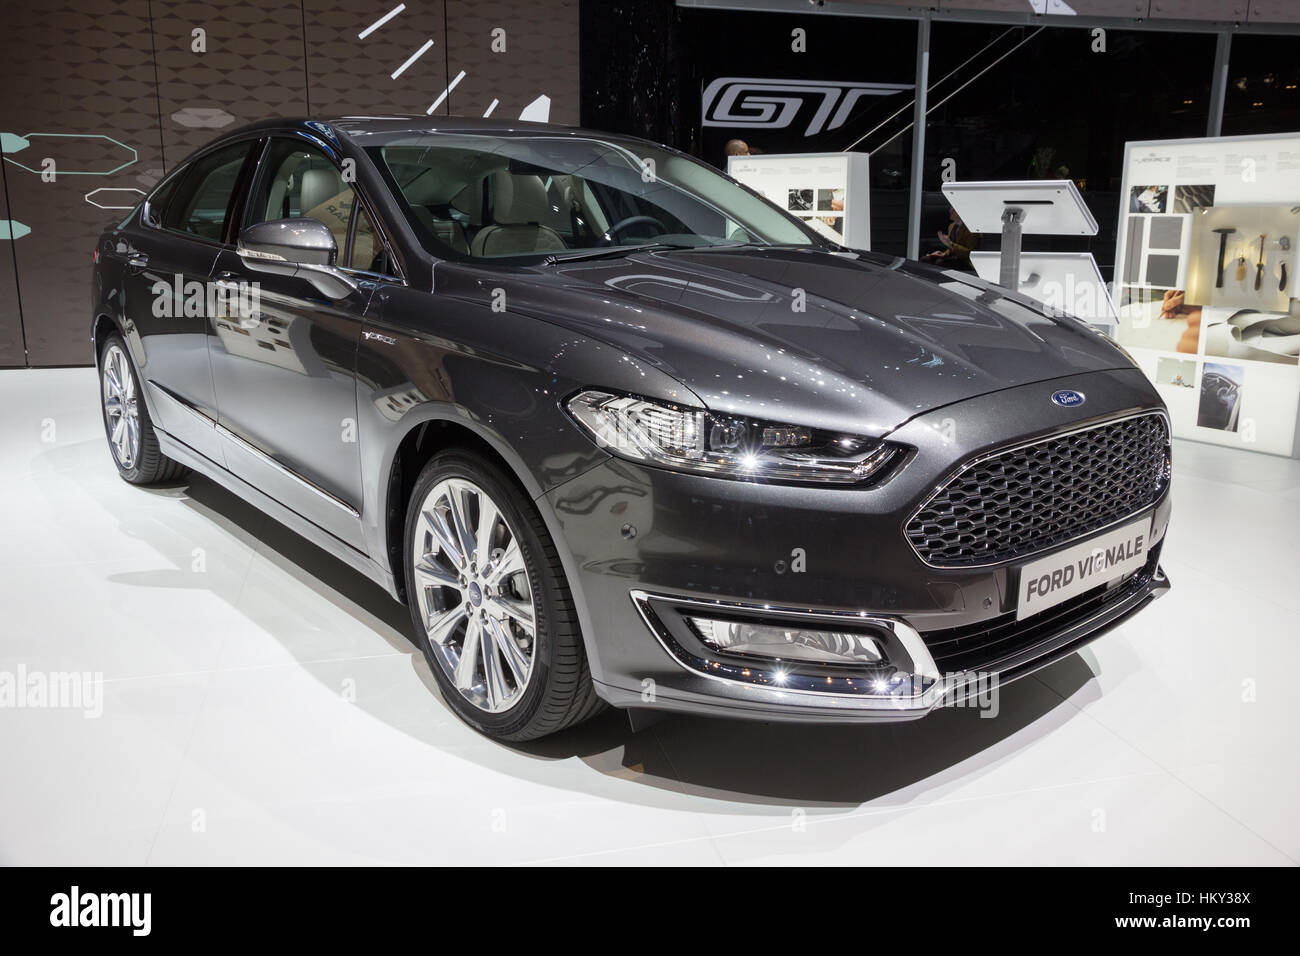 Page 5 - Mondeo High Resolution Stock Photography and Images - Alamy